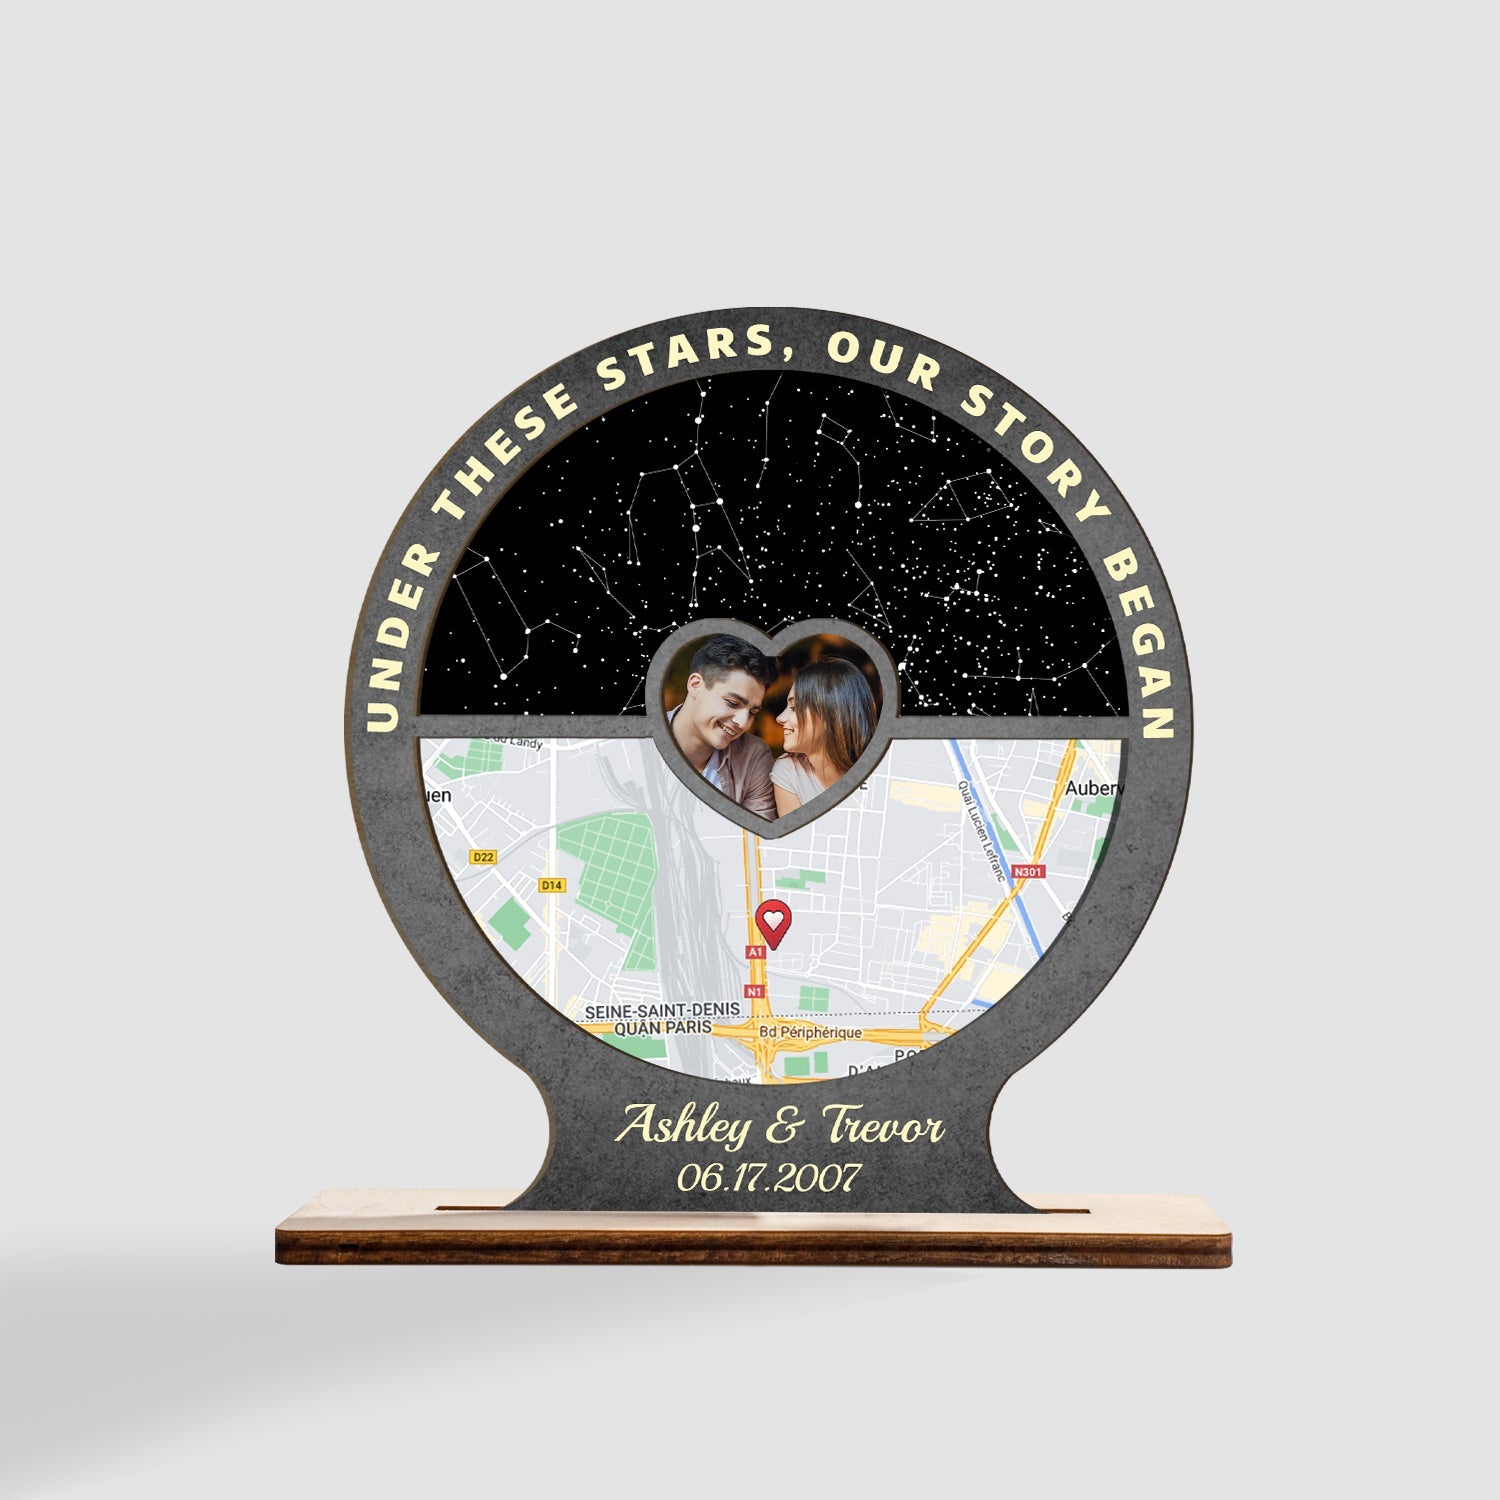 Under There Star, Our Story Began, Custom Night Sky, Map Print By Location And Photo, Wooden Plaque 3 Layers